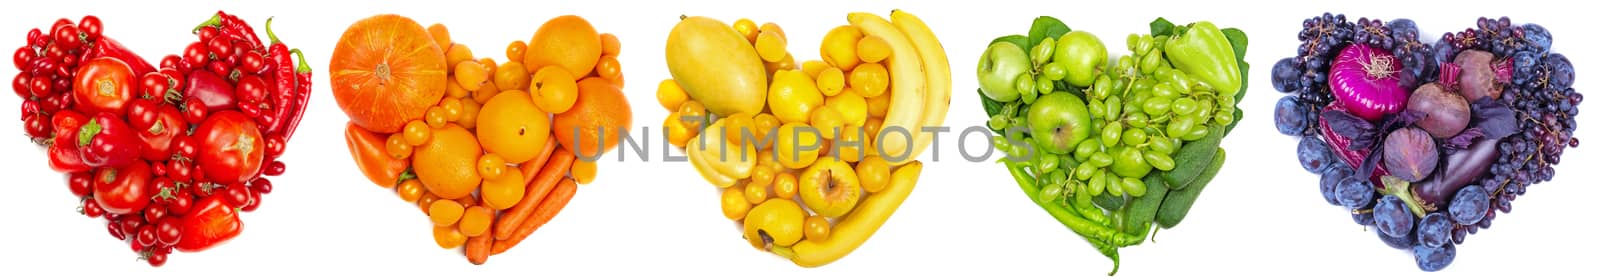 Rainbow color five colour heart of fruits and vegetables studio isolated on white background go vegetarian love healthy eating concept set collection conceptual design